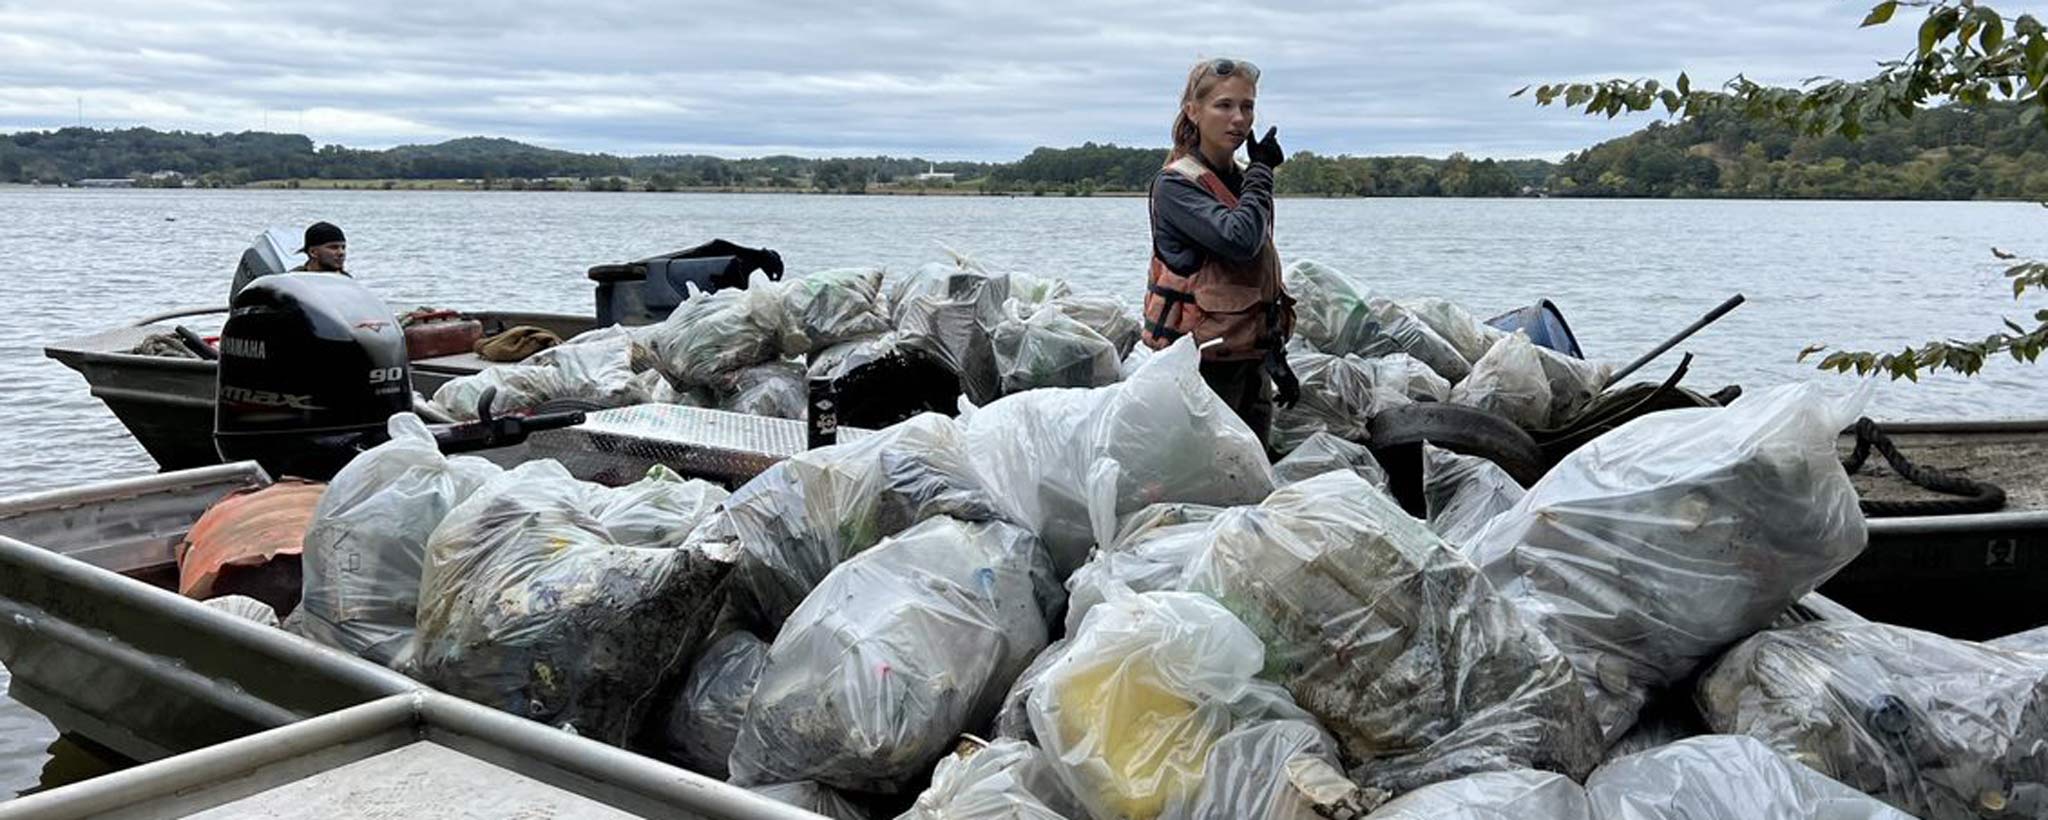 Two trash boats overflow with bags of litter